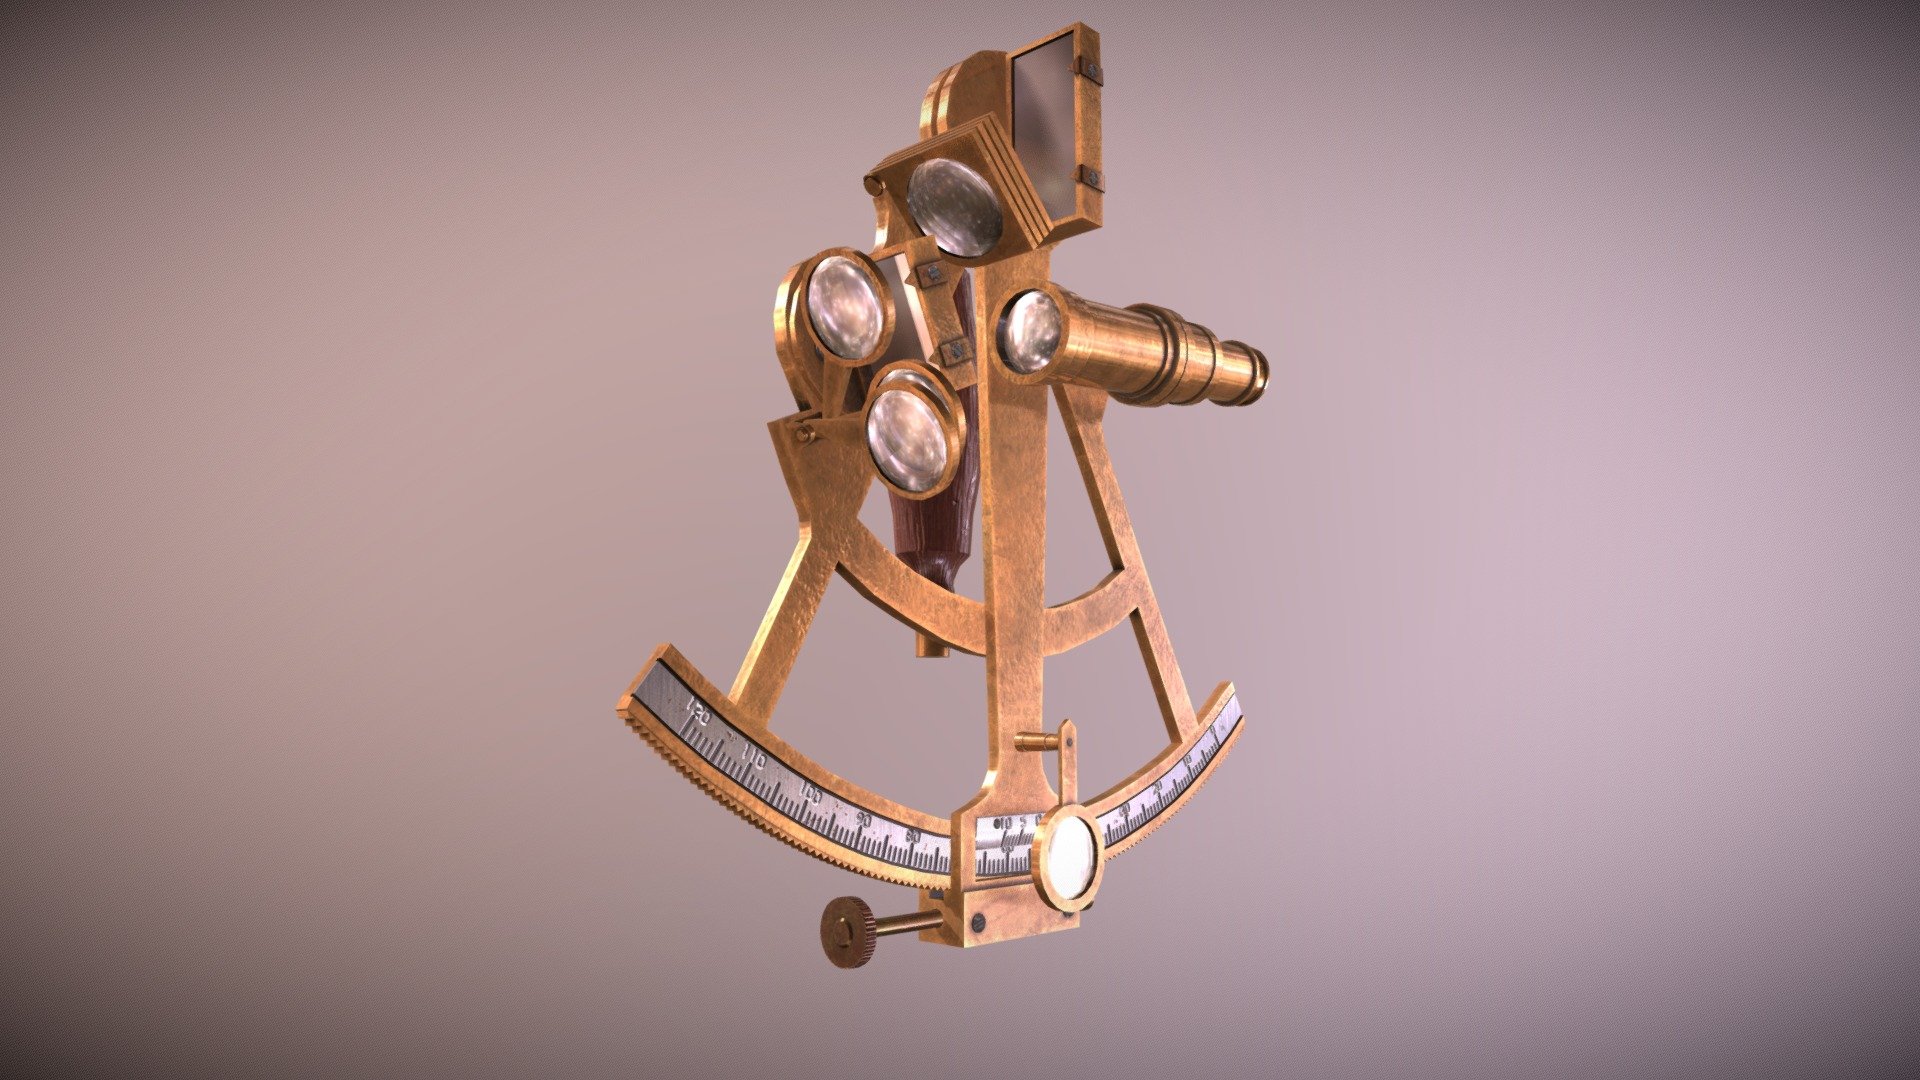 Game and VR ready asset with unwrapped 4K textures.

Perfect asset to populate your pirate scenes.

A sextant is a doubly reflecting navigation instrument that measures the angular distance between two visible objects. The primary use of a sextant is to measure the angle between an astronomical object and the horizon for the purposes of celestial navigation. The estimation of this angle, the altitude, is known as sighting or shooting the object, or taking a sight. The angle, and the time when it was measured, can be used to calculate a position line on a nautical or aeronautical chart—for example, sighting the Sun at noon or Polaris at night (in the Northern Hemisphere) to estimate latitude. Sighting the height of a landmark can give a measure of distance off and, held horizontally, a sextant can measure angles between objects for a position on a chart 3d model